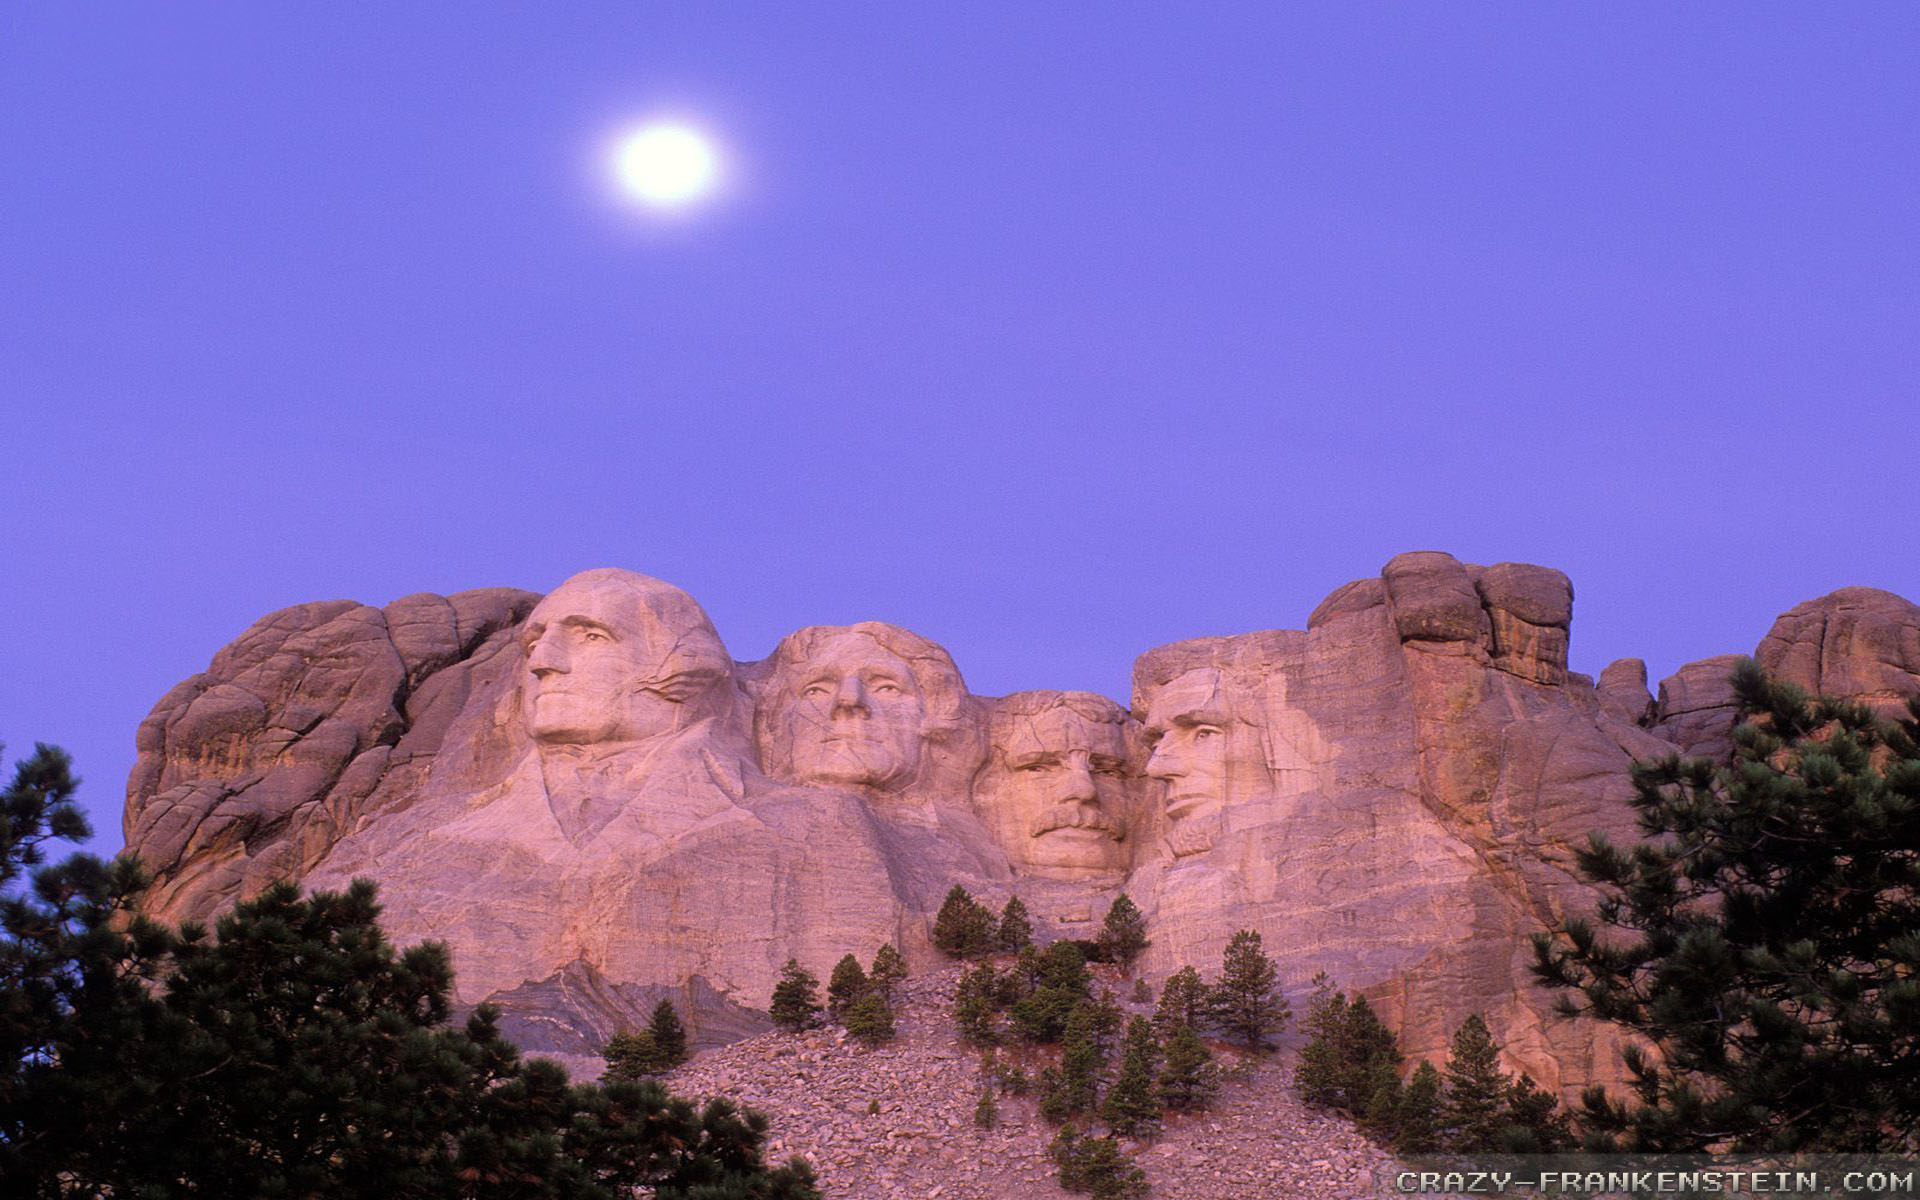 Presidential Portraits Pount Rushmore National Monument